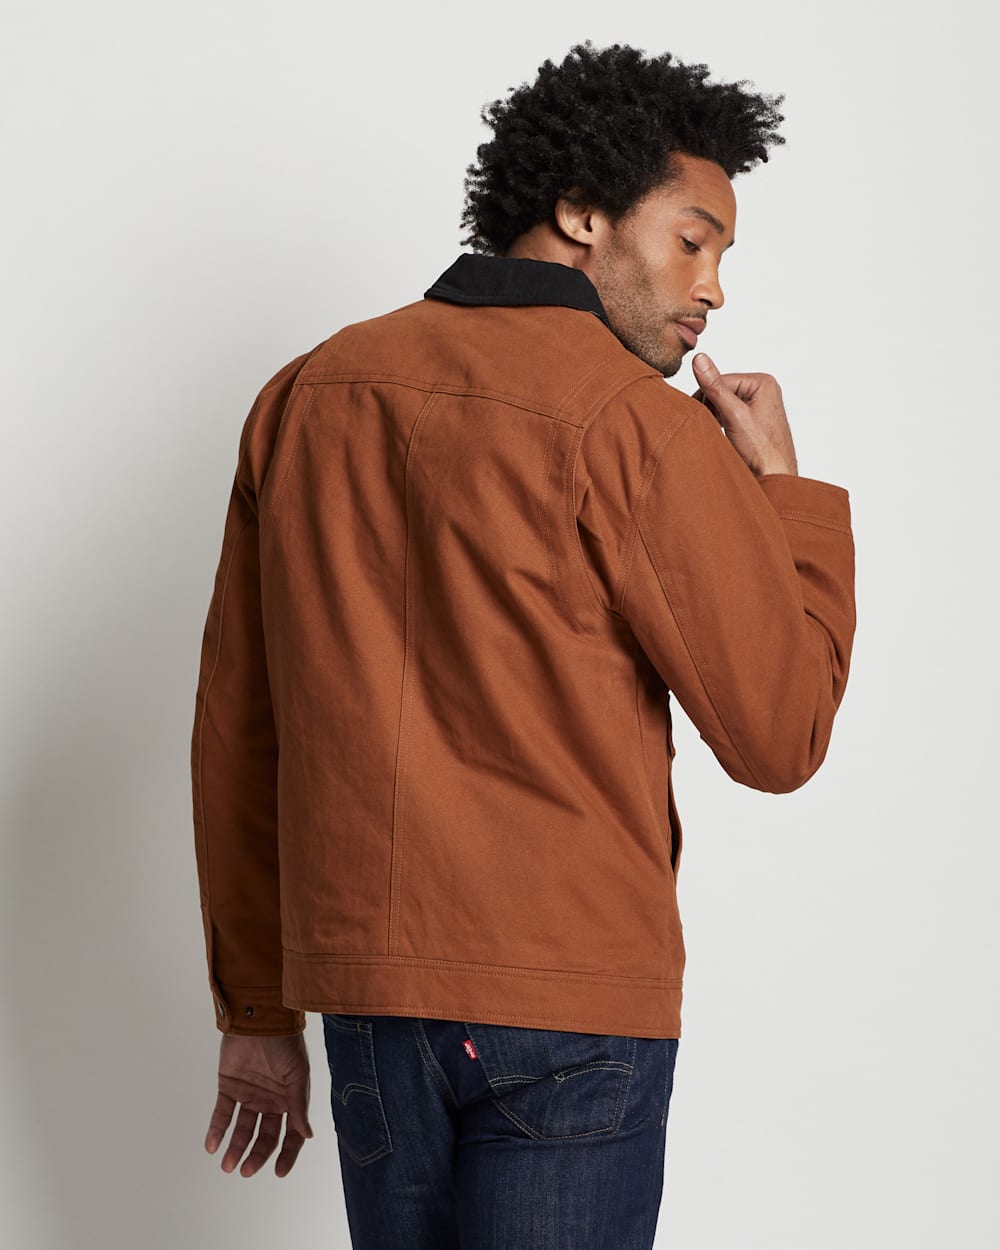 ALTERNATE VIEW OF MEN'S CARSON CITY CANVAS BARN COAT IN WHISKEY image number 2